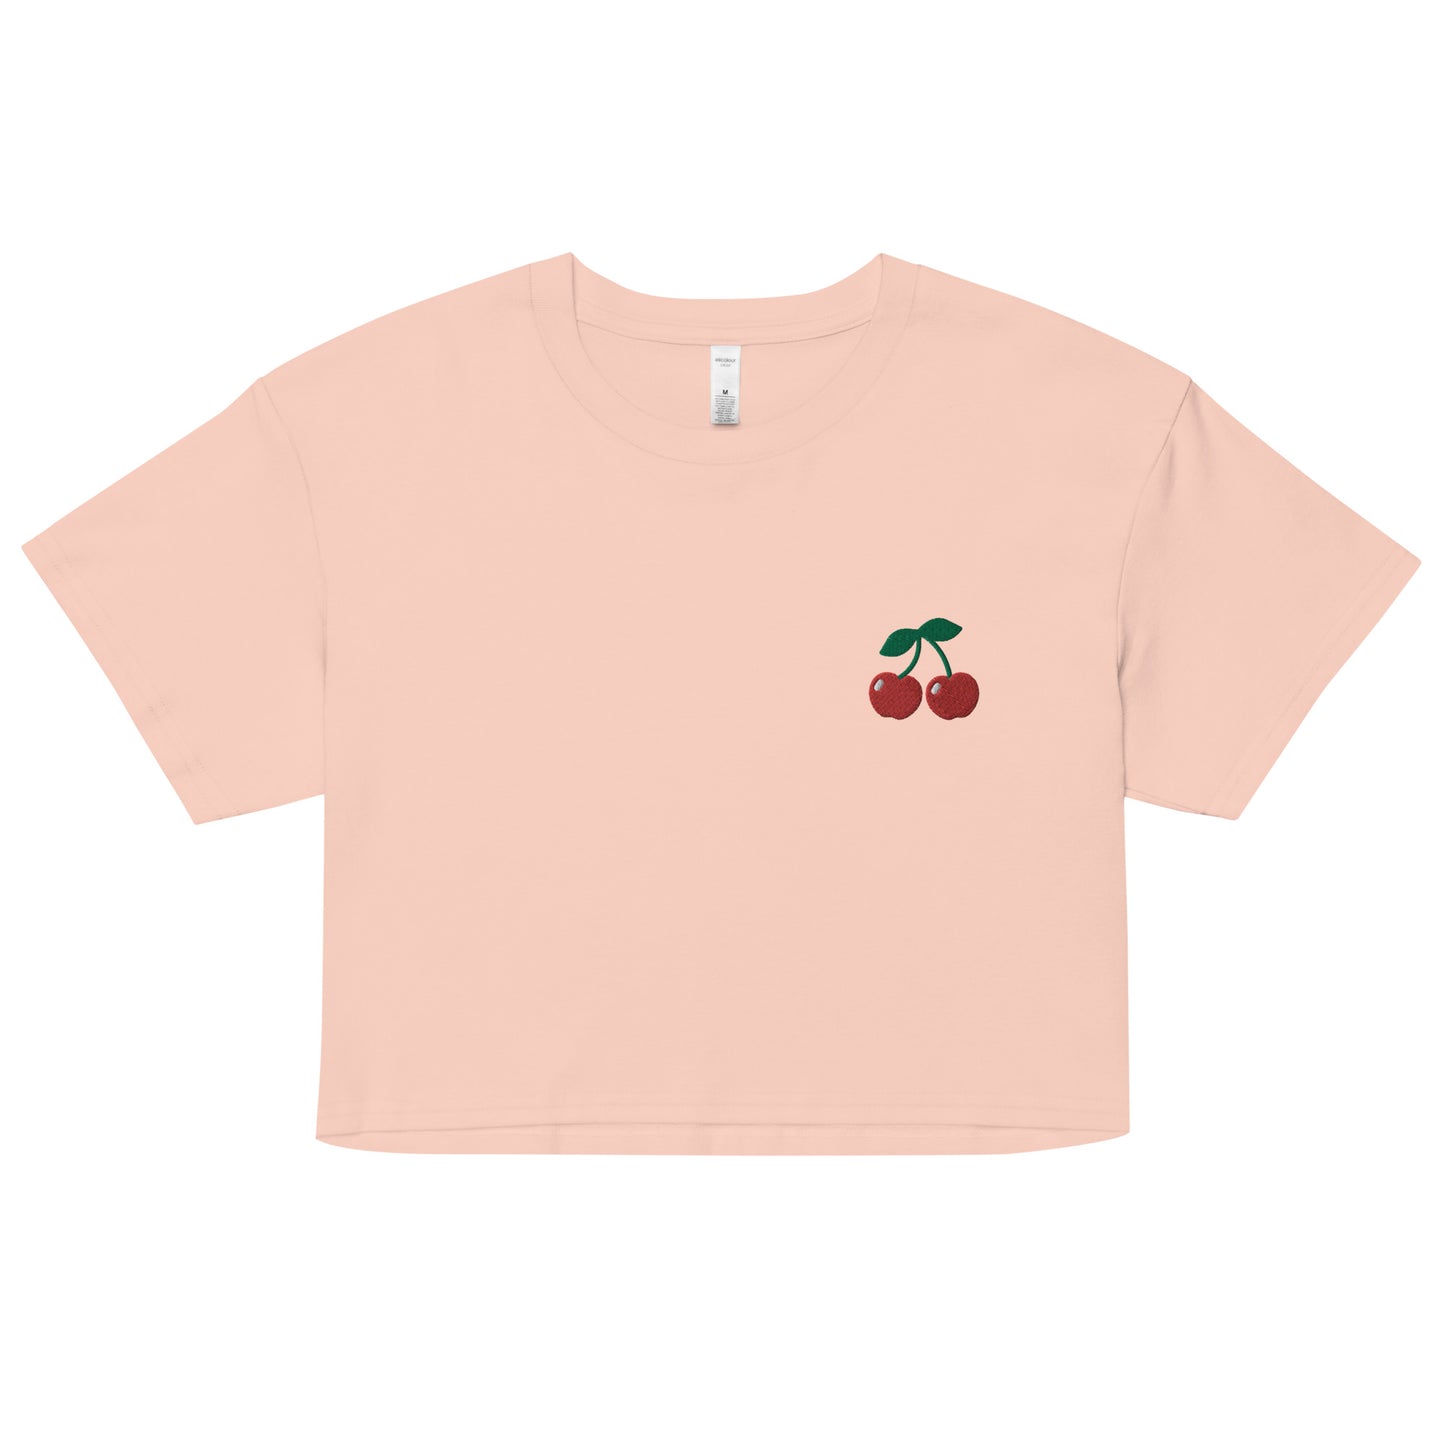 A relaxed, modest pale pink crop top features a subtle cherry emoji embroidery. Adding a touch of fruity to your look—a playful celebration of lgbtq culture! Made from 100% combed cotton. Available in Extra Small, Small, Medium, Large, Extra Large.